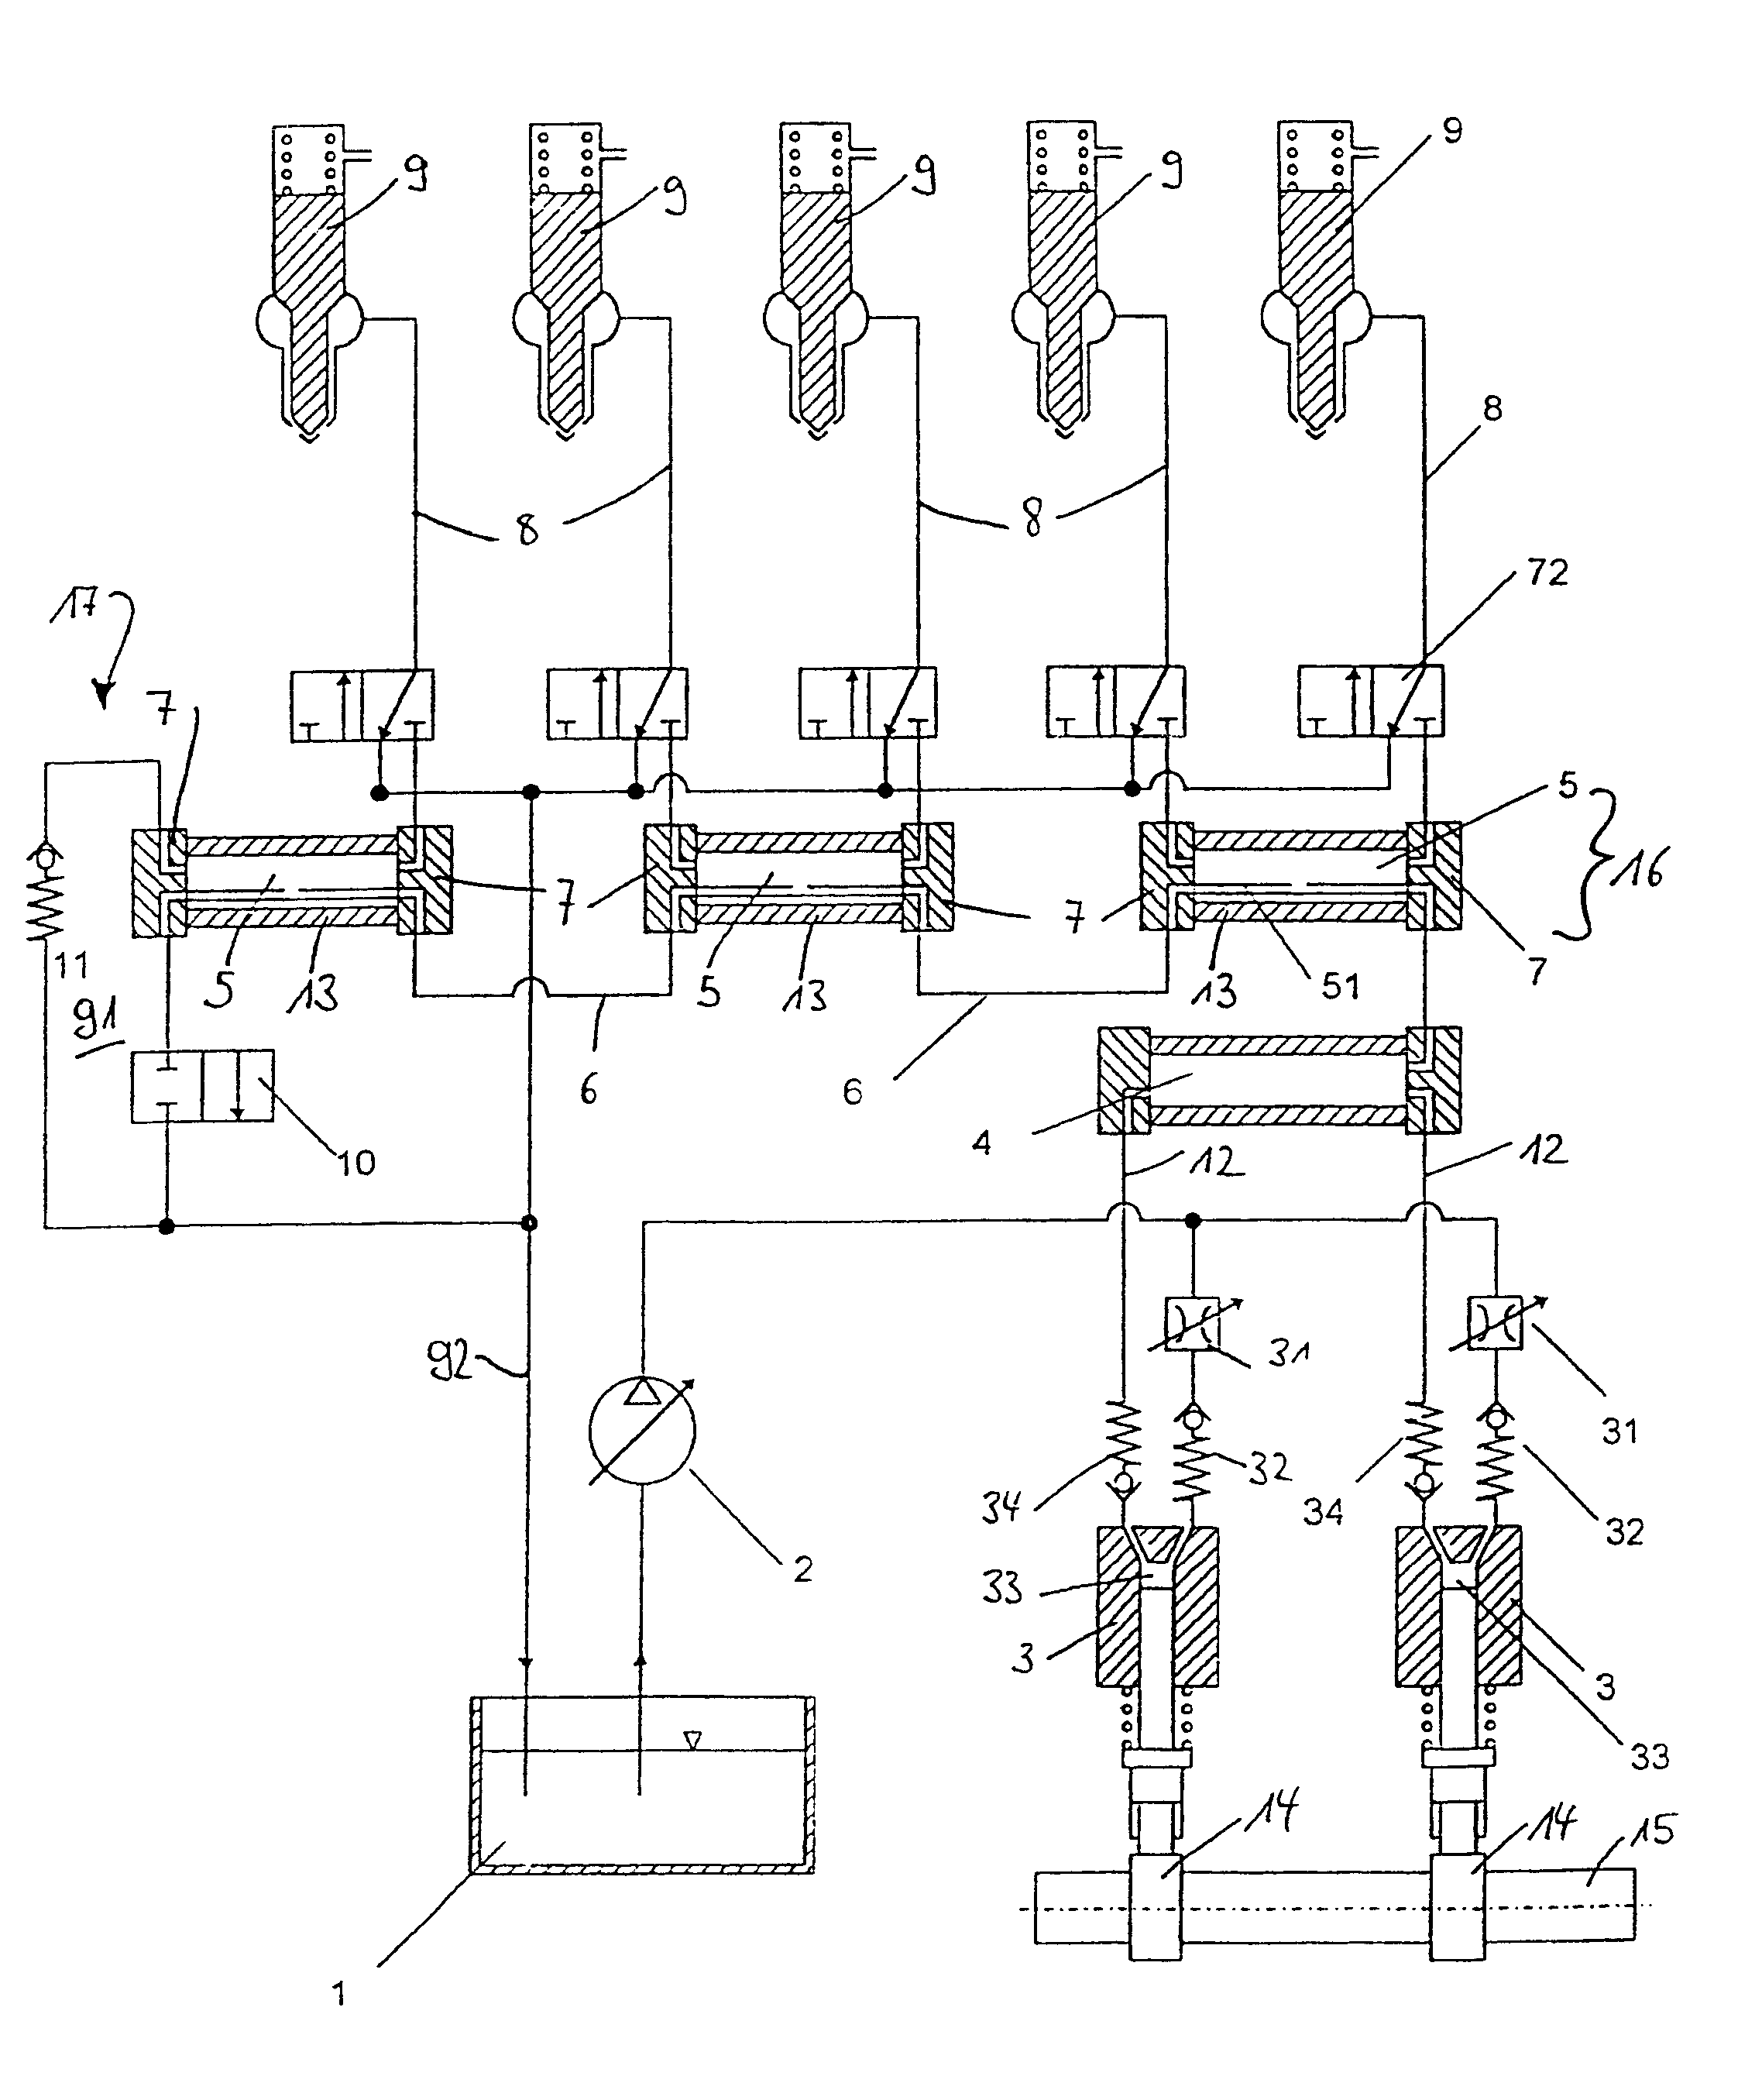 Fuel supply installation in the form of a common-rail system of an internal combustion engine having a plurality of cylinders